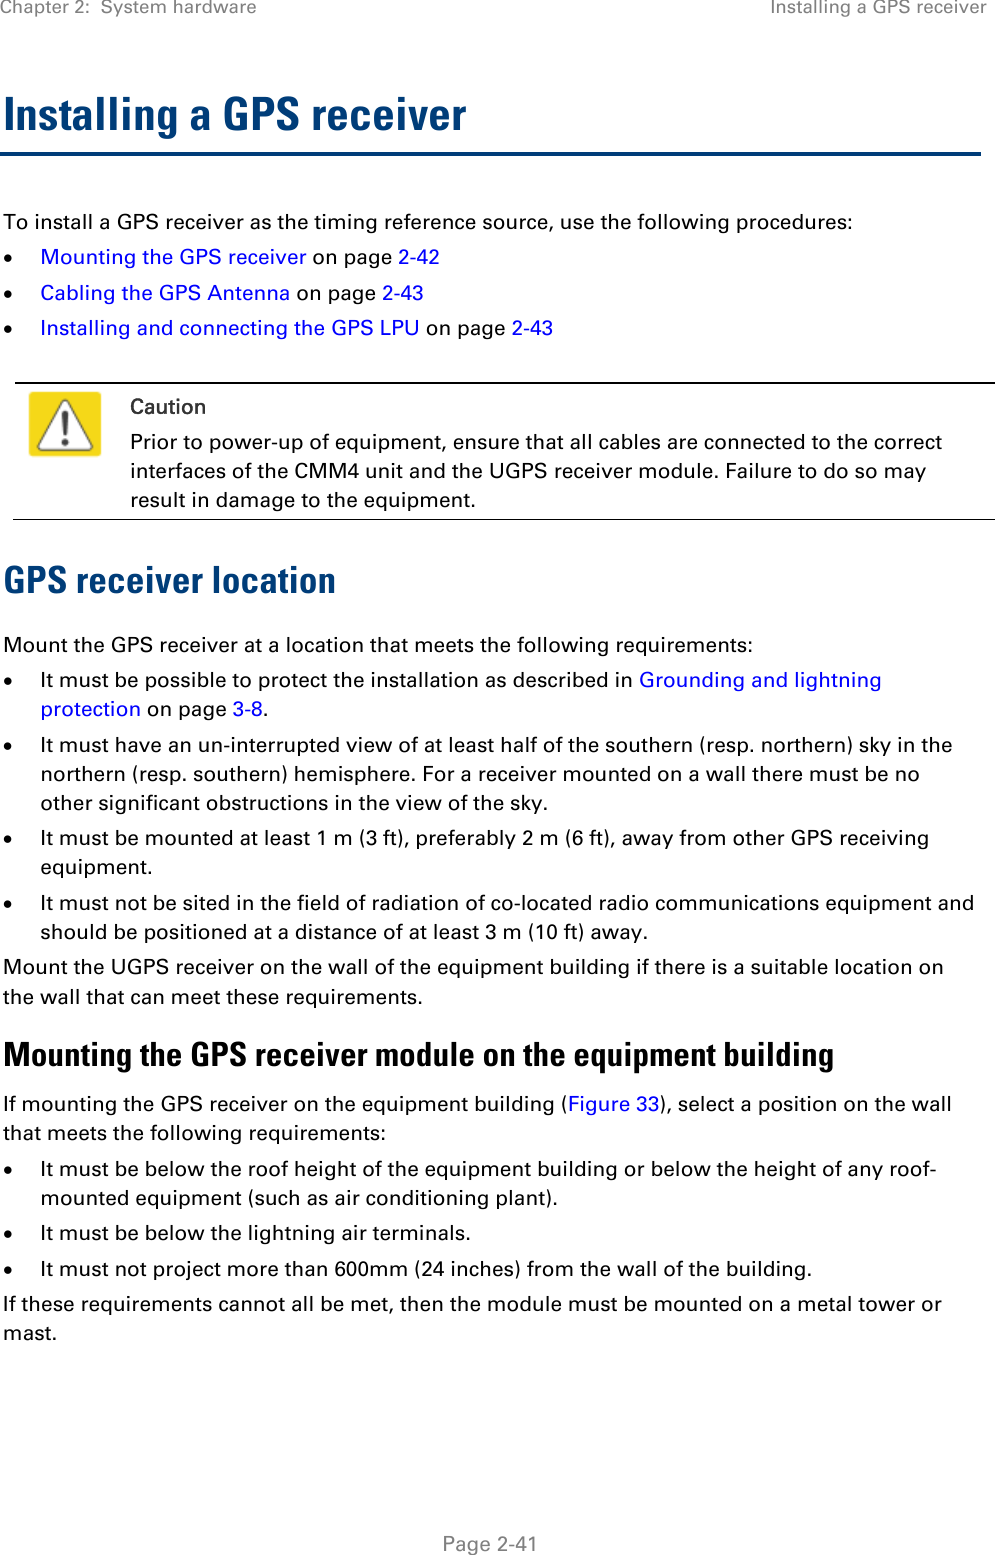 Chapter 2:  System hardware  Installing a GPS receiver   Page 2-41 Installing a GPS receiver  To install a GPS receiver as the timing reference source, use the following procedures:  Mounting the GPS receiver on page 2-42  Cabling the GPS Antenna on page 2-43  Installing and connecting the GPS LPU on page 2-43   Caution Prior to power-up of equipment, ensure that all cables are connected to the correct interfaces of the CMM4 unit and the UGPS receiver module. Failure to do so may result in damage to the equipment. GPS receiver location Mount the GPS receiver at a location that meets the following requirements:  It must be possible to protect the installation as described in Grounding and lightning protection on page 3-8.  It must have an un-interrupted view of at least half of the southern (resp. northern) sky in the northern (resp. southern) hemisphere. For a receiver mounted on a wall there must be no other significant obstructions in the view of the sky.  It must be mounted at least 1 m (3 ft), preferably 2 m (6 ft), away from other GPS receiving equipment.  It must not be sited in the field of radiation of co-located radio communications equipment and should be positioned at a distance of at least 3 m (10 ft) away. Mount the UGPS receiver on the wall of the equipment building if there is a suitable location on the wall that can meet these requirements.  Mounting the GPS receiver module on the equipment building If mounting the GPS receiver on the equipment building (Figure 33), select a position on the wall that meets the following requirements:  It must be below the roof height of the equipment building or below the height of any roof-mounted equipment (such as air conditioning plant).  It must be below the lightning air terminals.  It must not project more than 600mm (24 inches) from the wall of the building. If these requirements cannot all be met, then the module must be mounted on a metal tower or mast. 